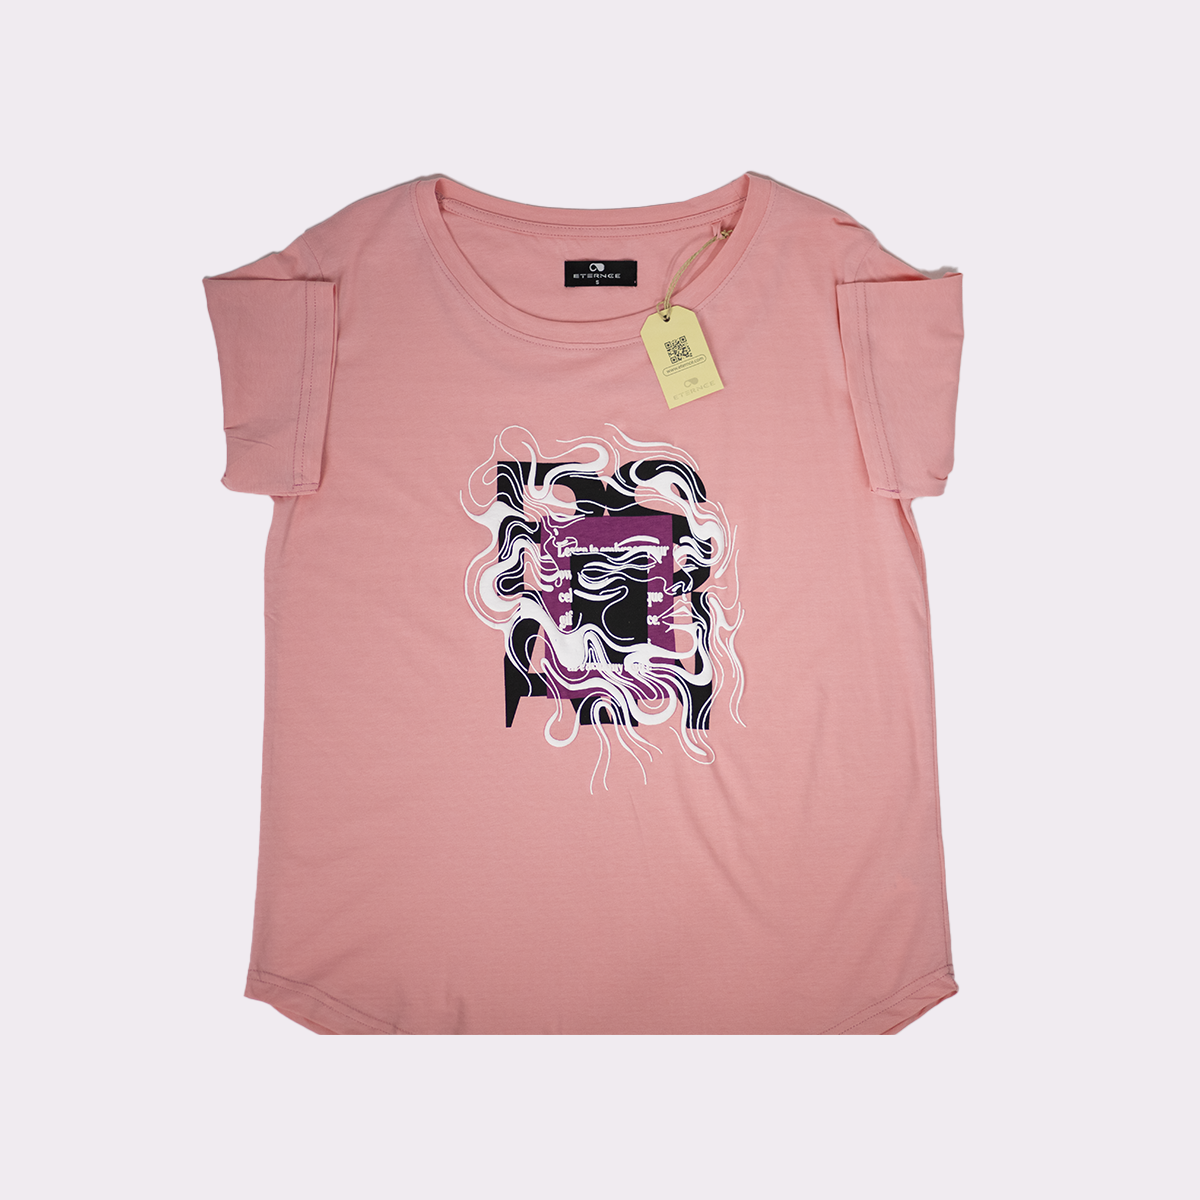 UNIQUE BEAUTY Printed Tee Personalized Fashion for Women